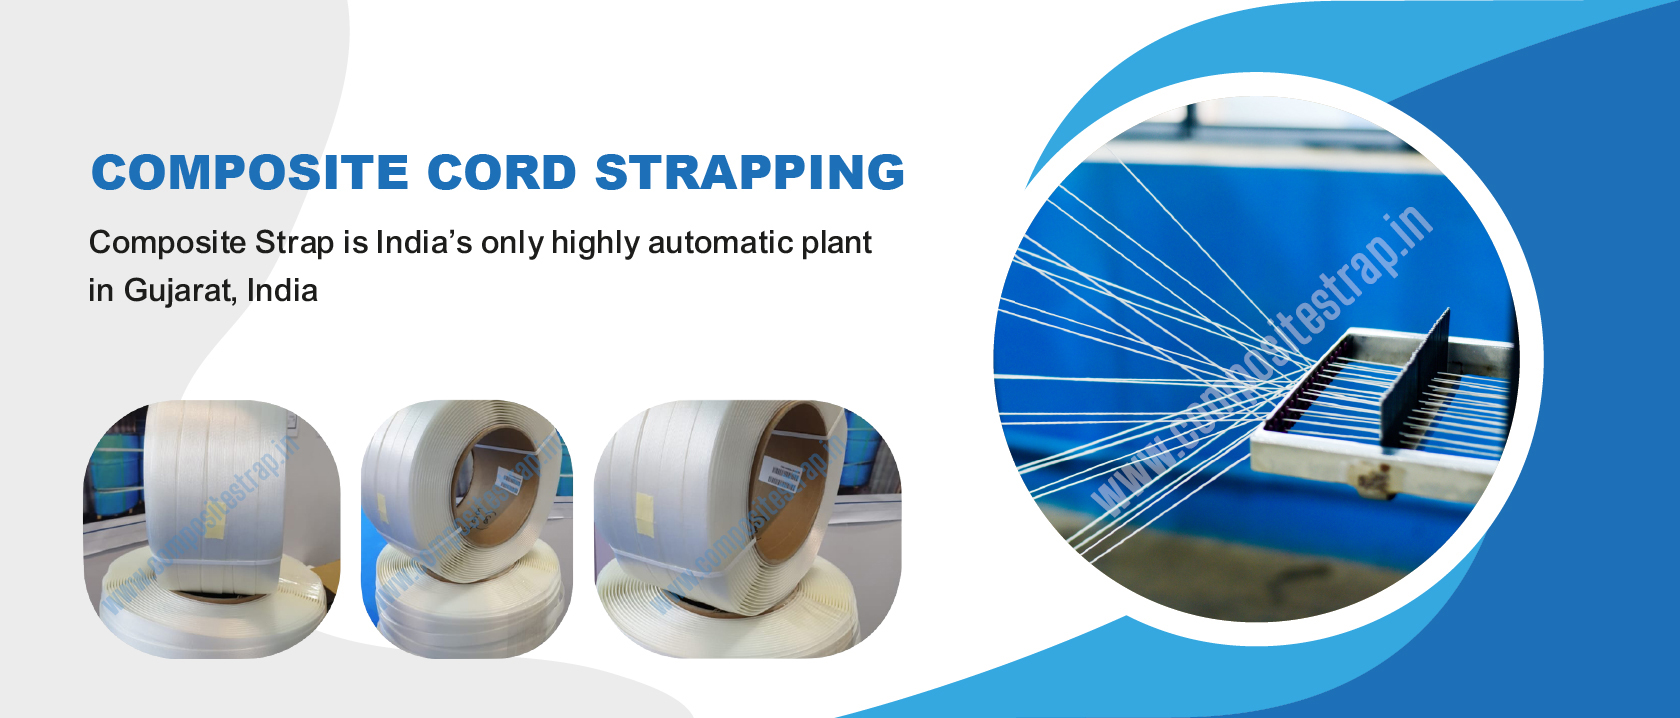 Composite Cord Strapping